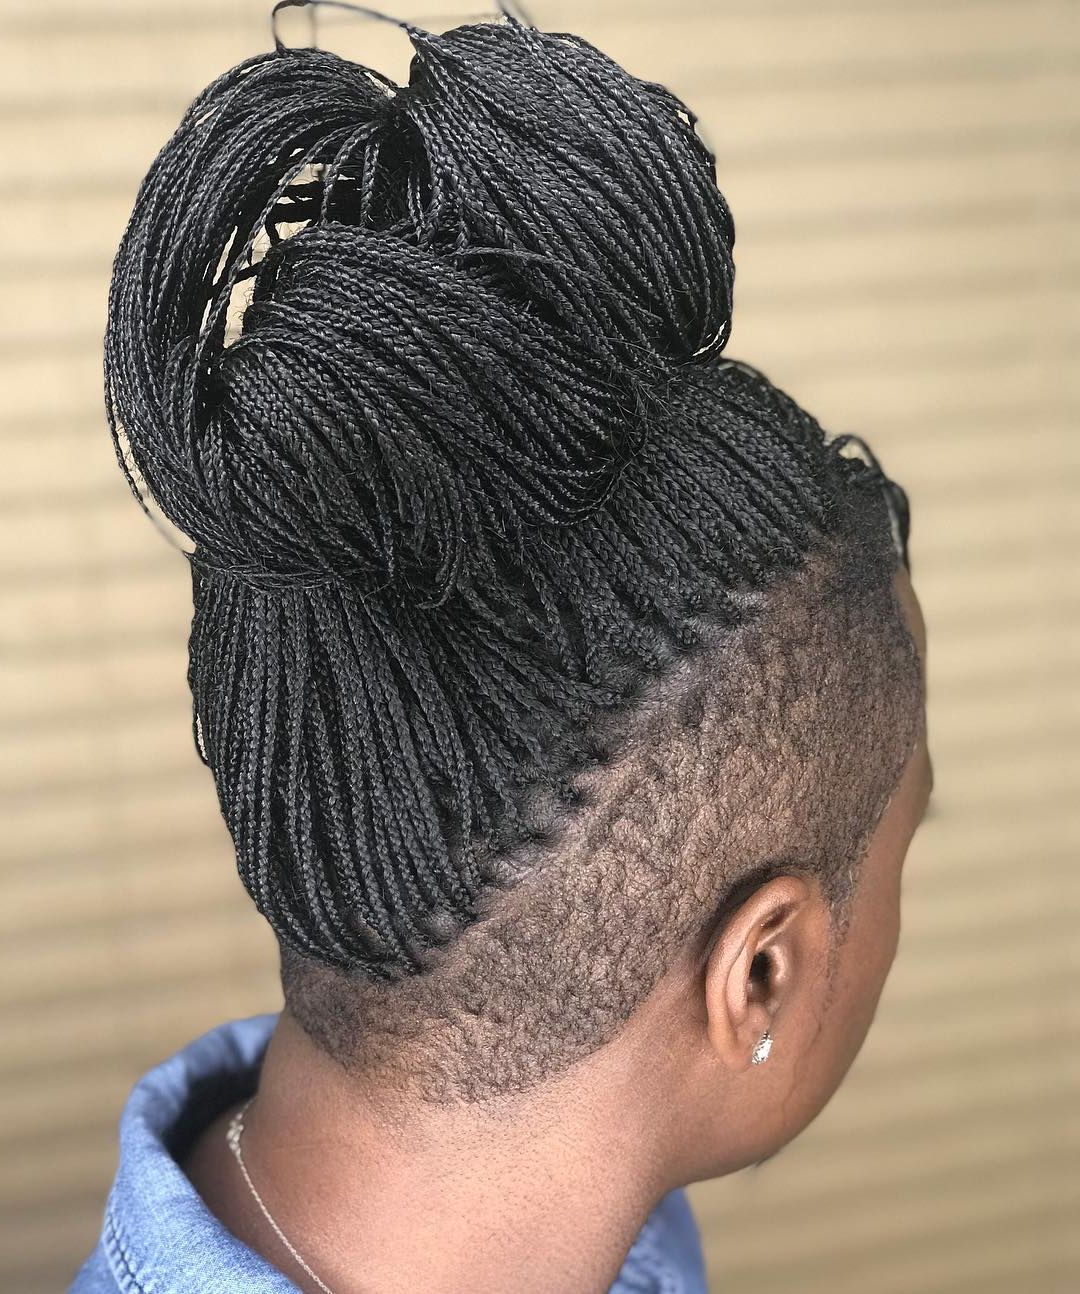 20 Superb Braids With Shaved Sides Worth Copying Intended For Most Up To Date Cornrow Ombre Ponytail Micro Braid Hairstyles (View 20 of 20)